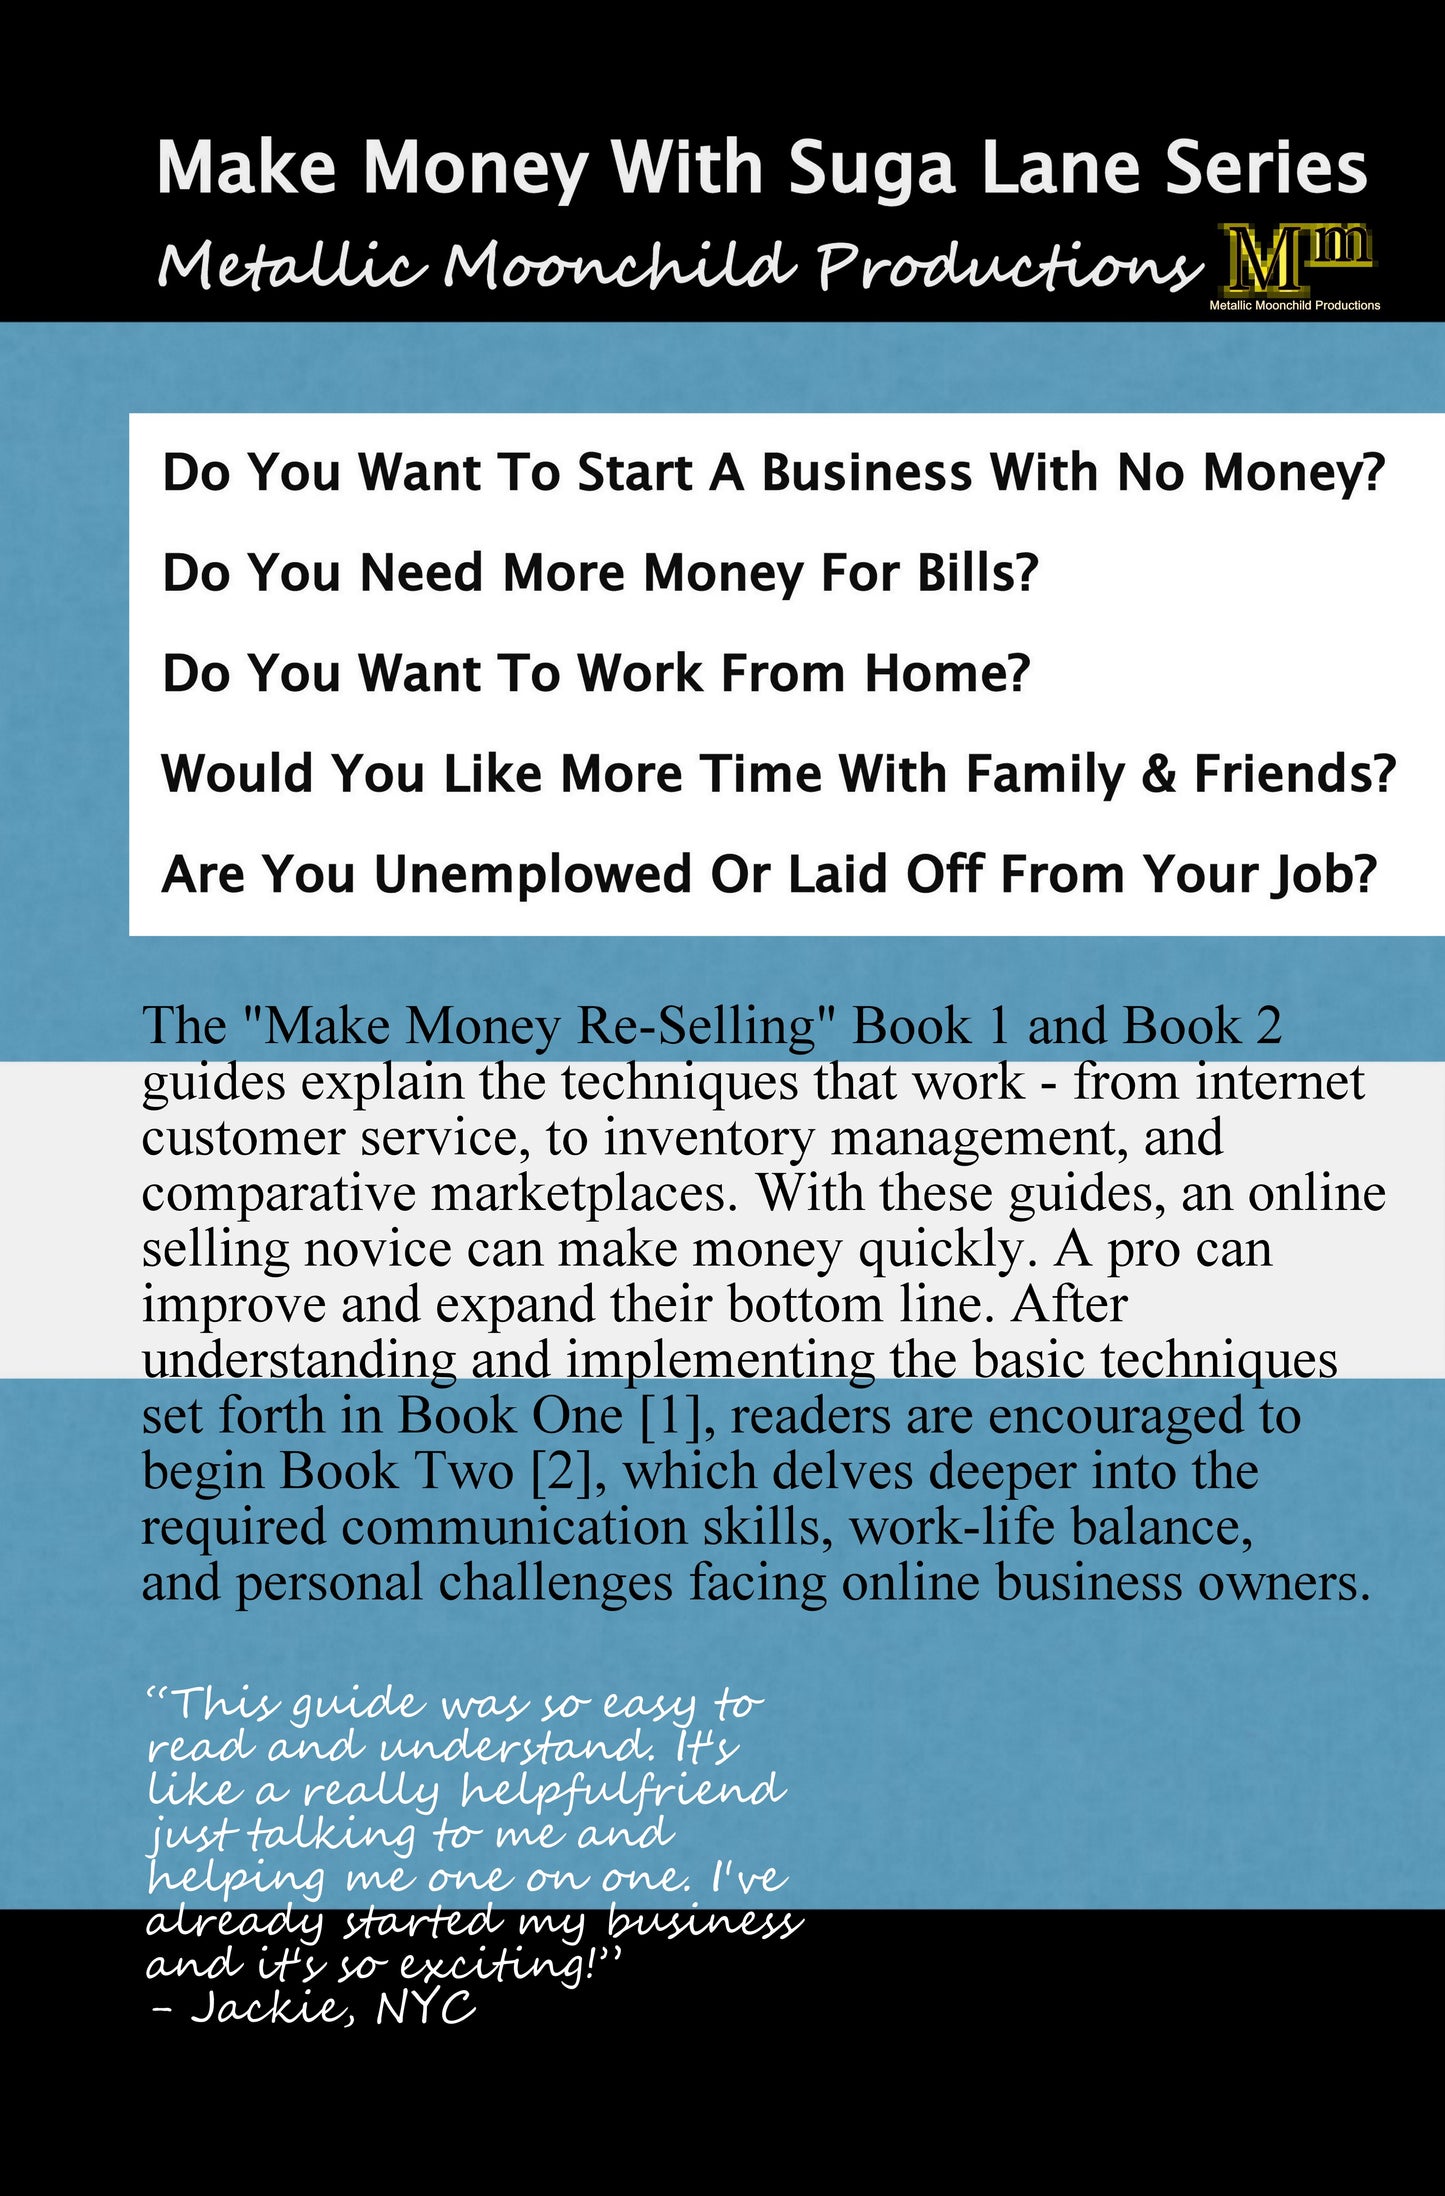 Make Money Re-Selling Clothing & Decor Online: Book 1